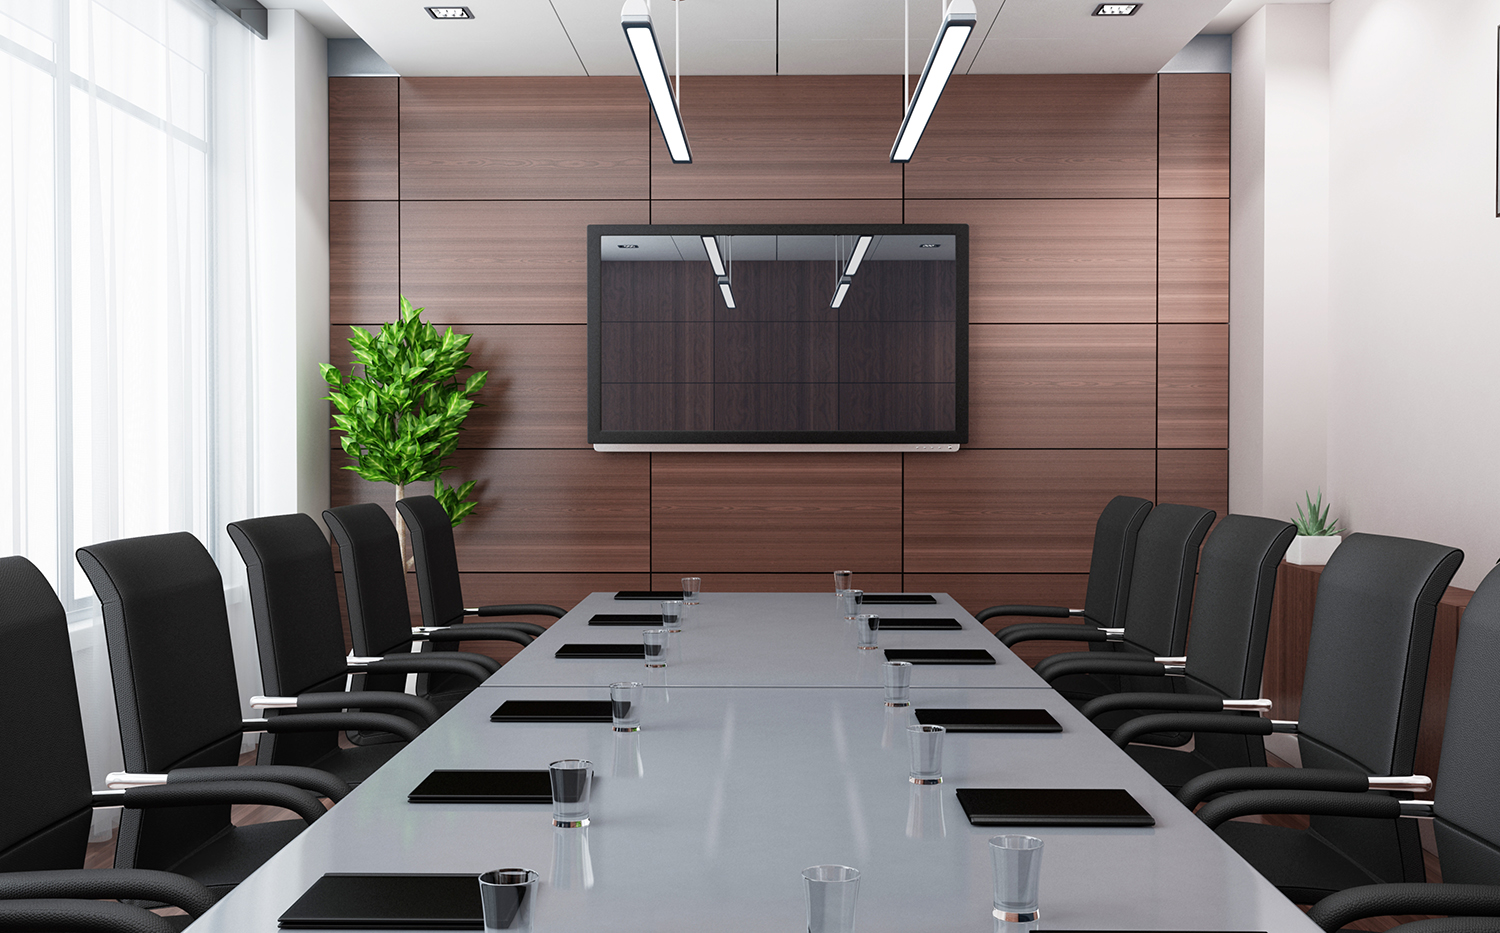 Meeting Room Background